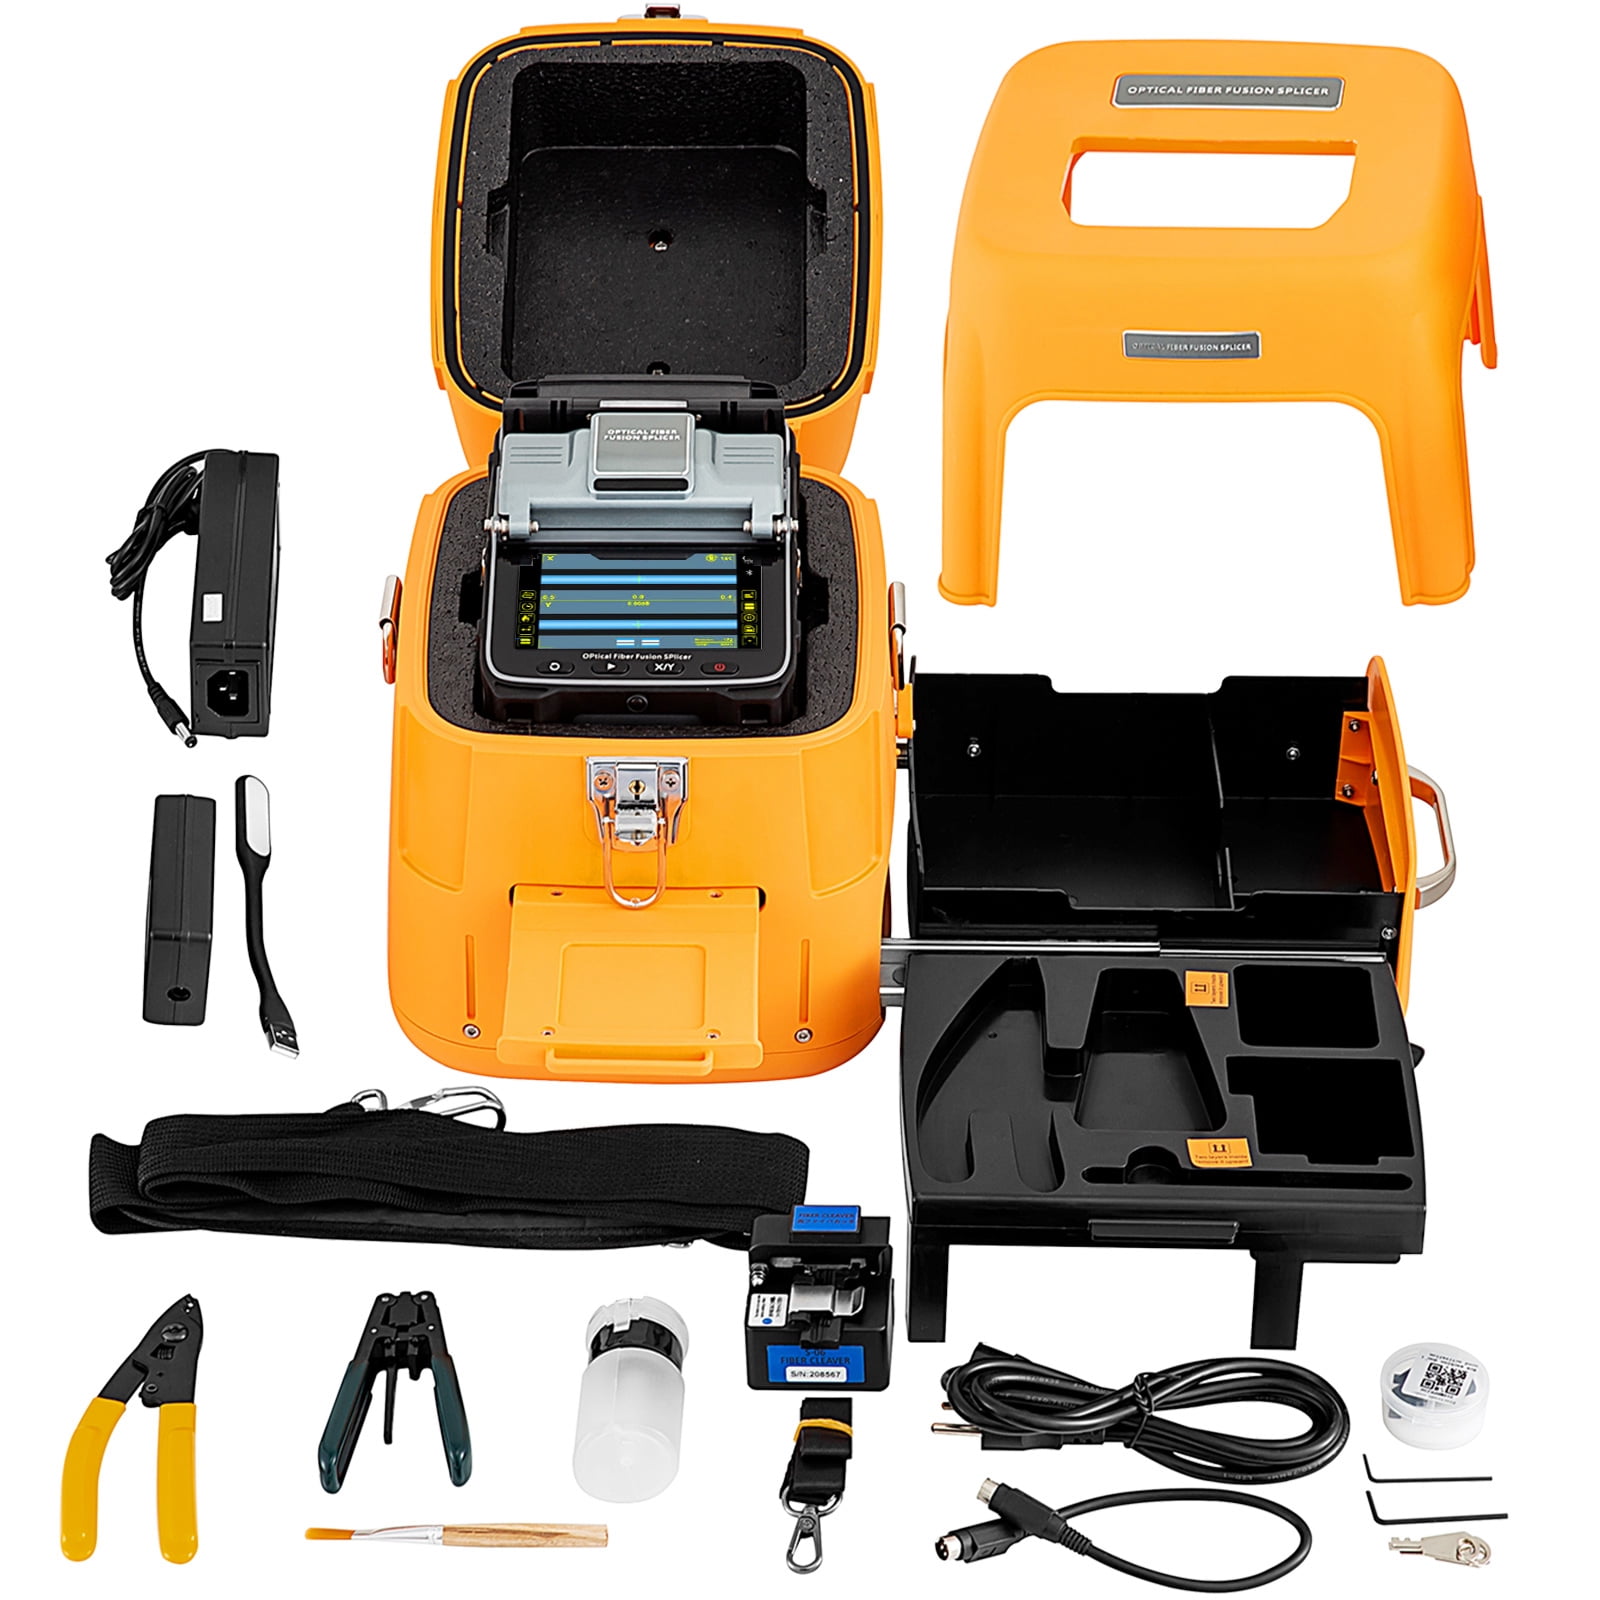 VEVOR AI-7 Fiber Fusion Splicer with Seconds Splicing Time Melting 18 Seconds  Heating Fusion Splicer Machine Optical Fiber Cleaver Kit for Optical Fiber   Cable Projects